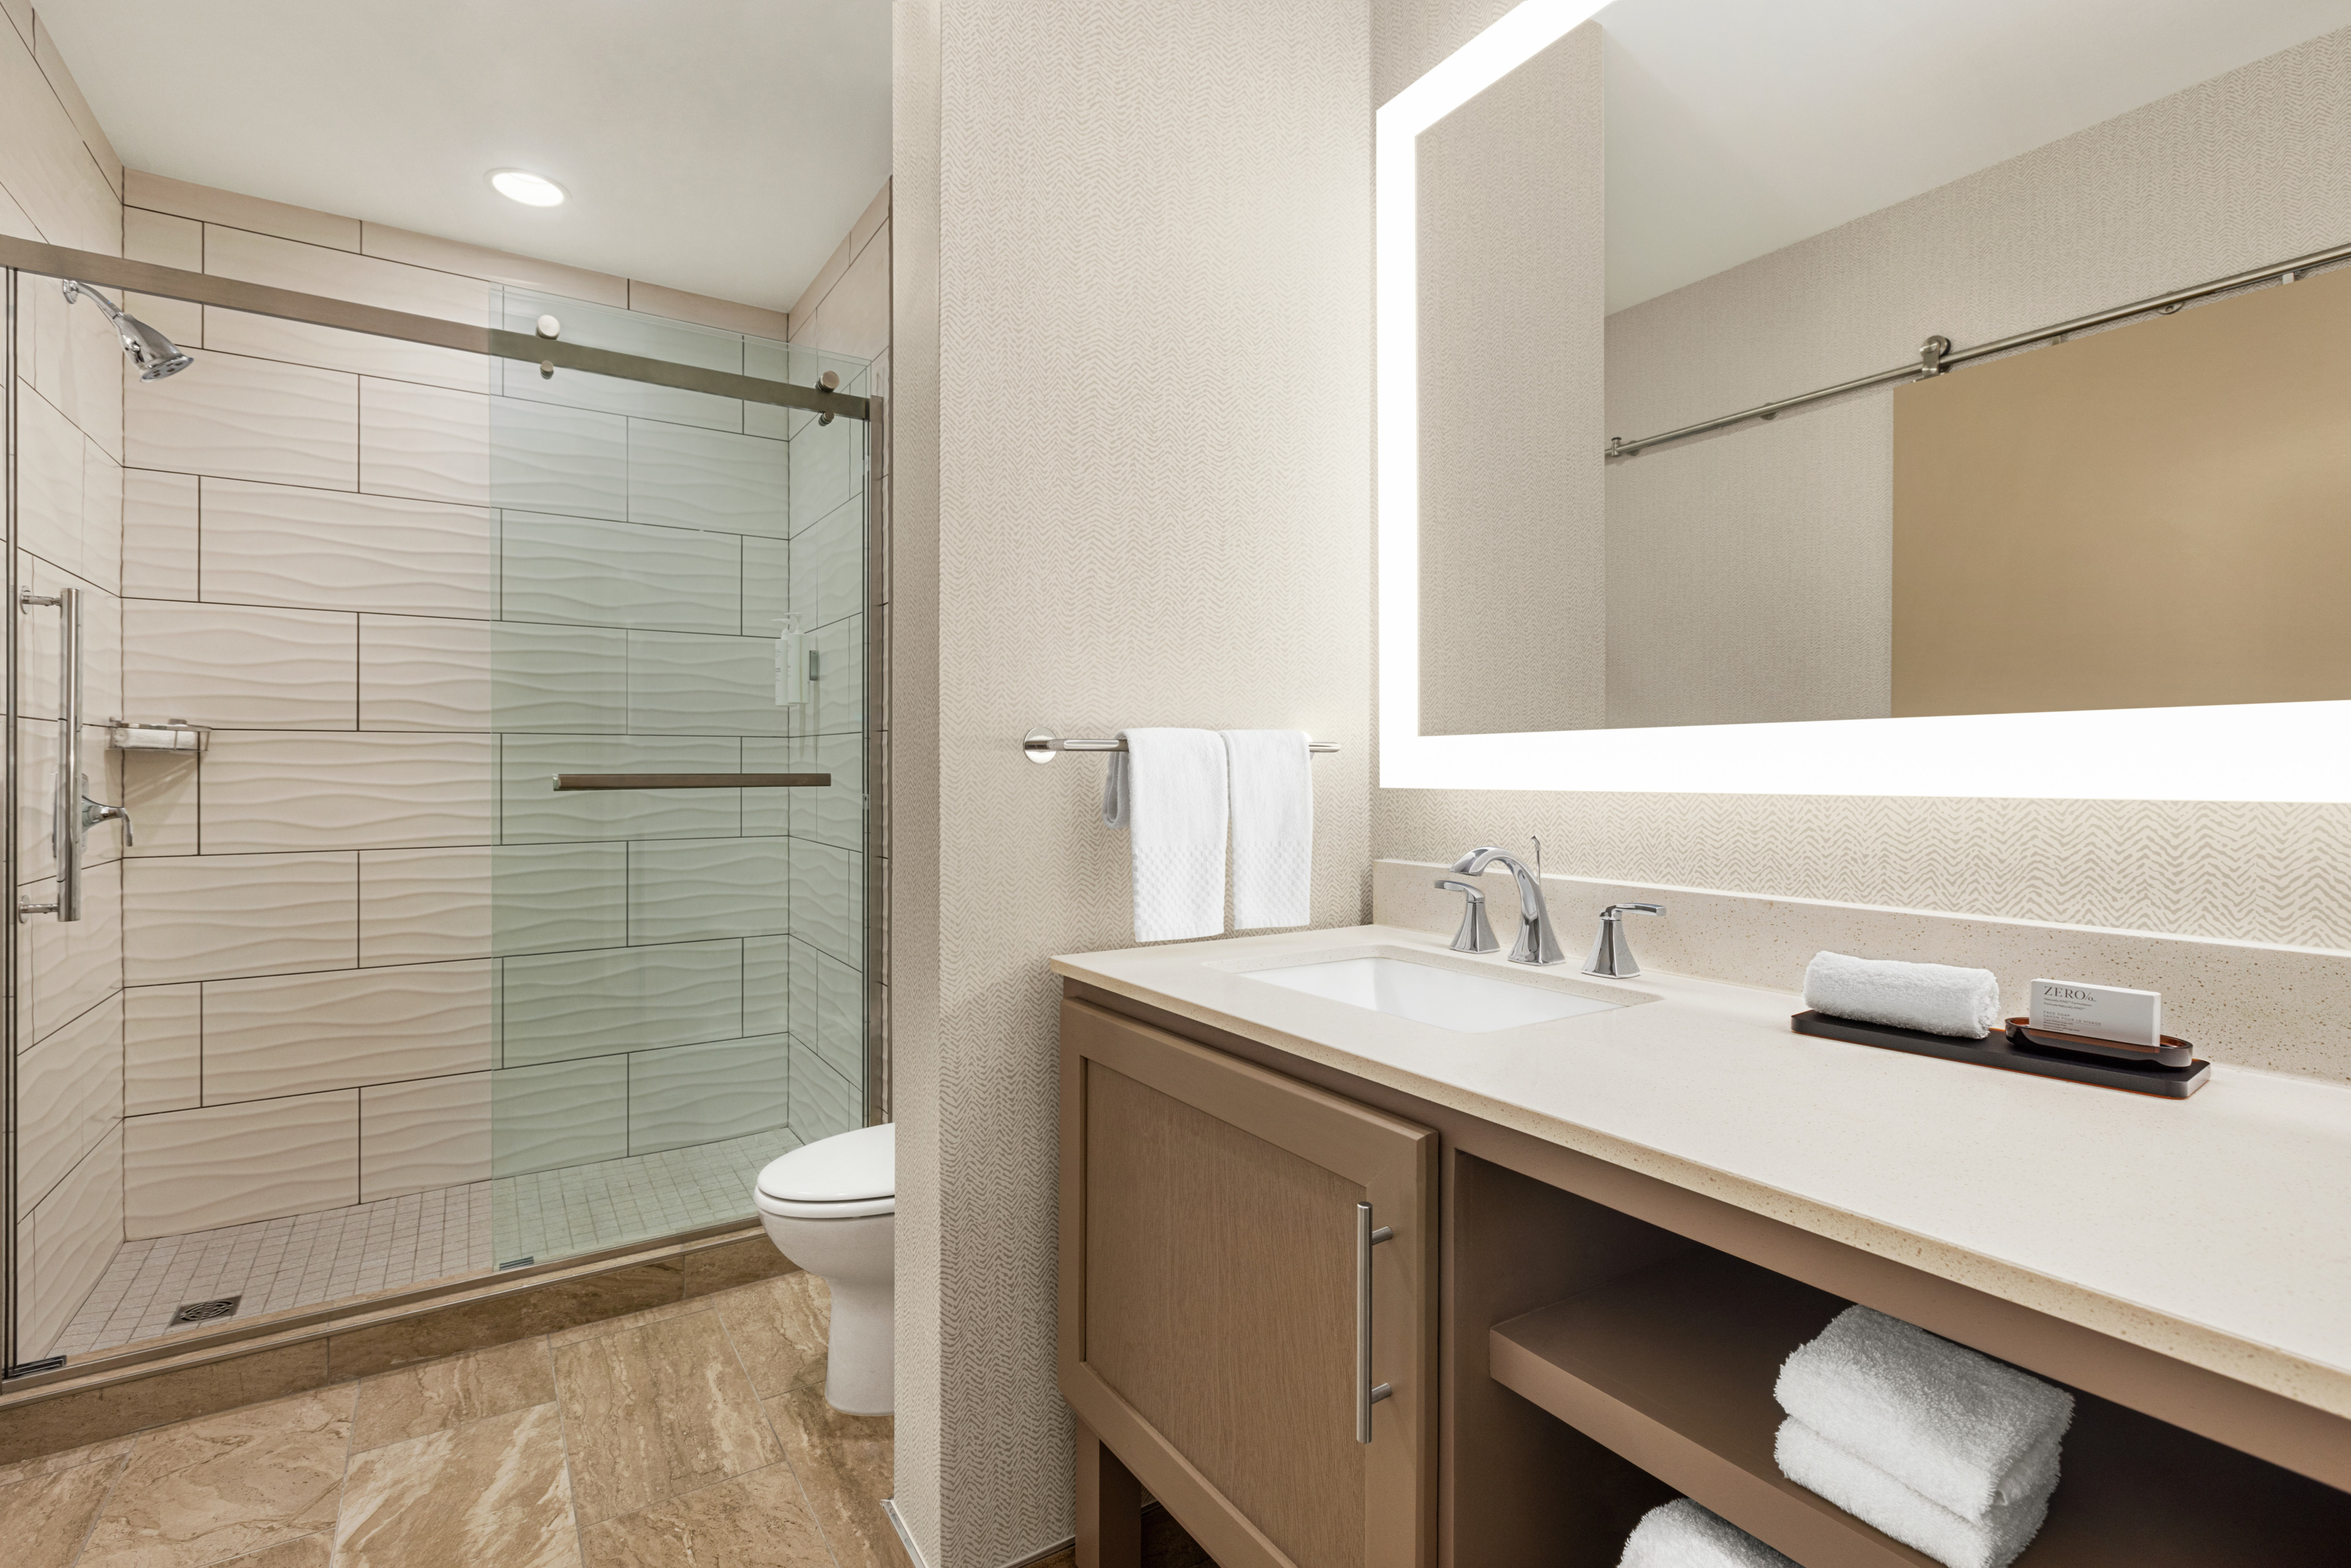 Spacious guest bathroom featuring large vanity, mirror, and walk in shower.